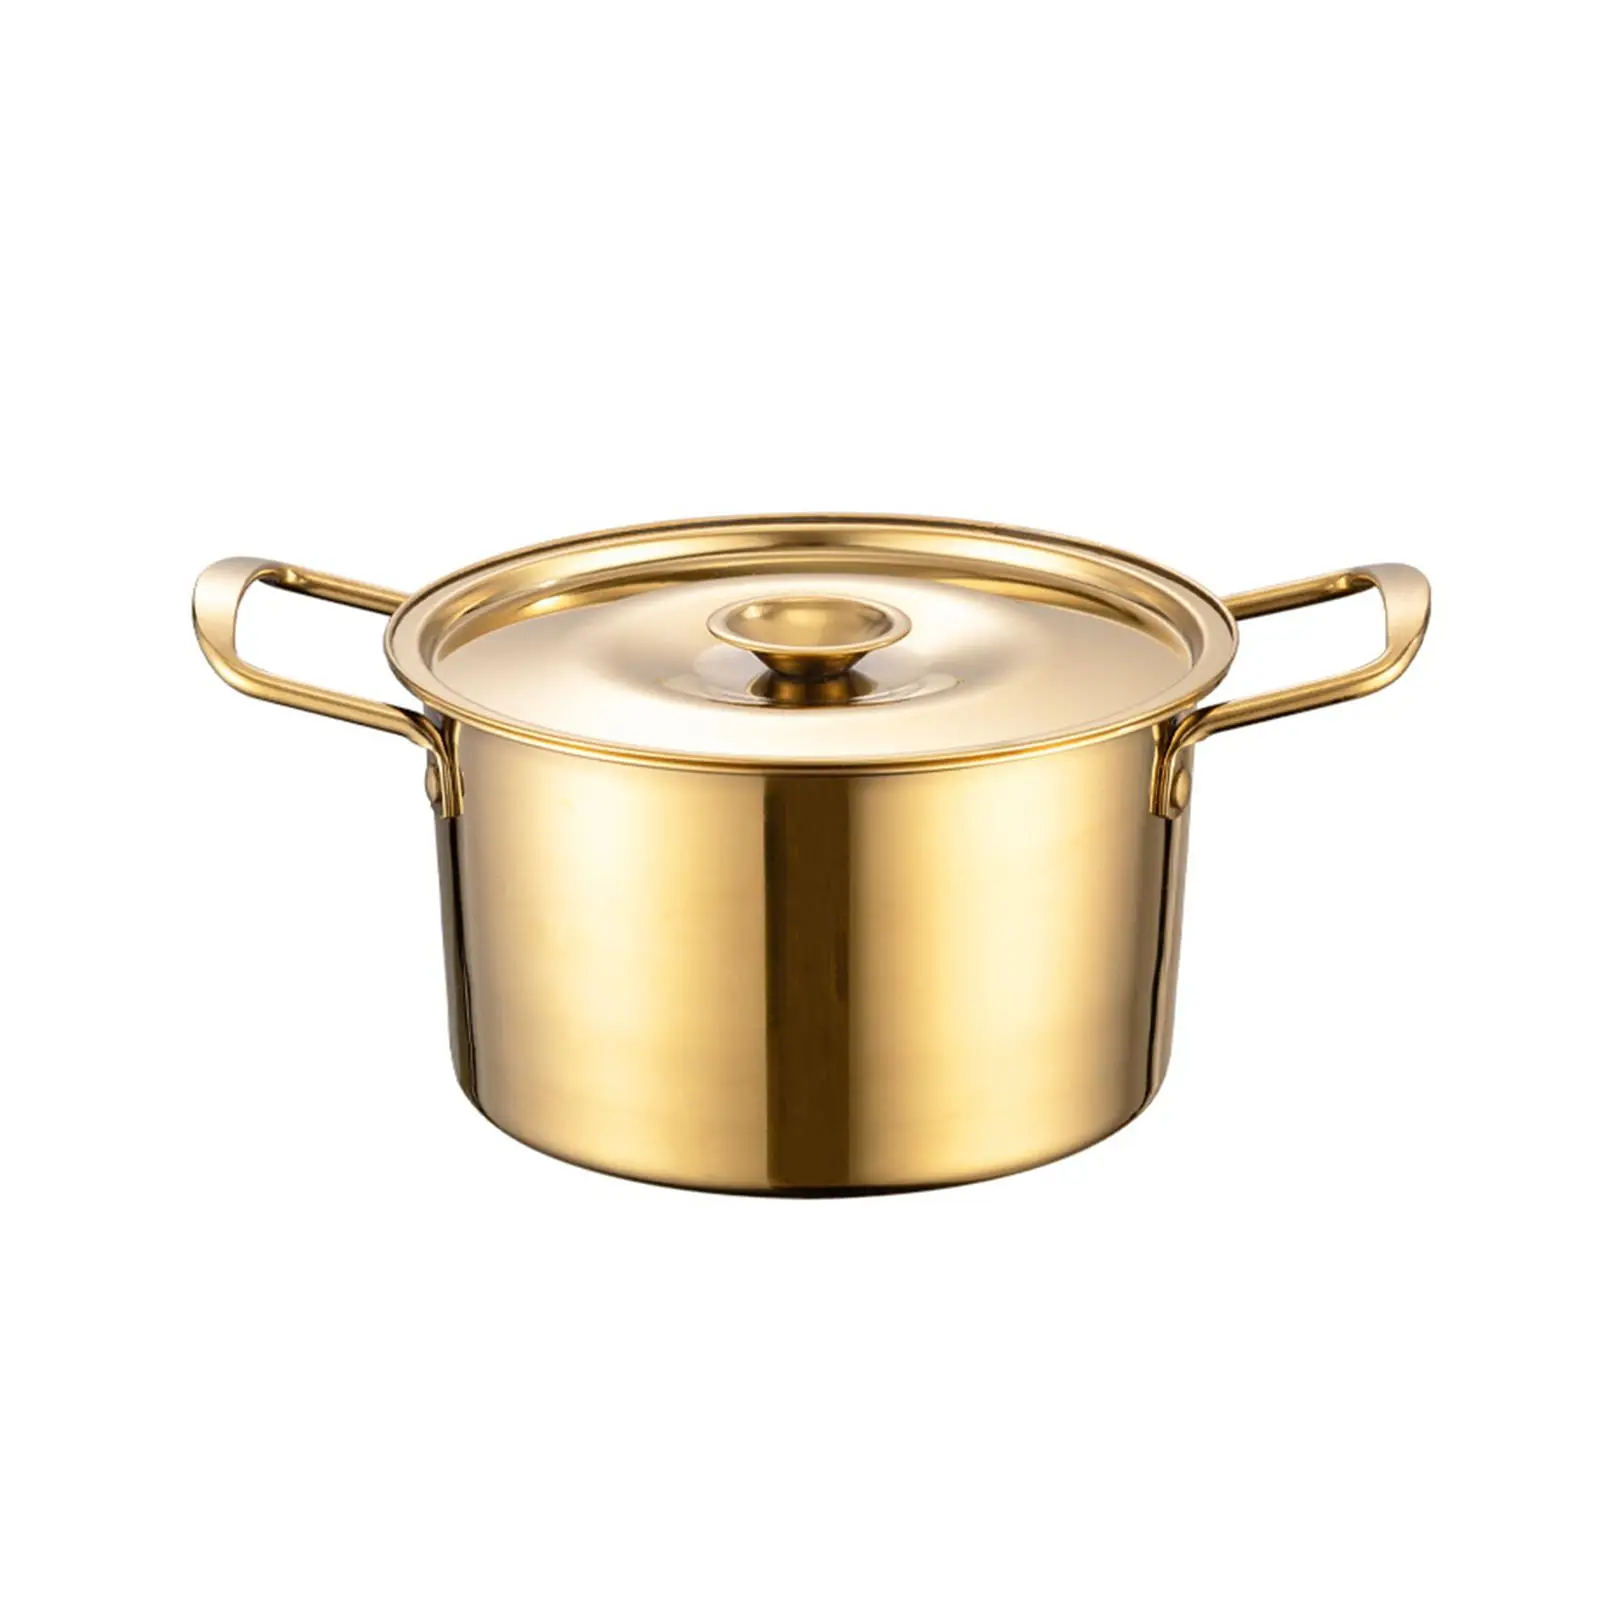 Instant Noodles Pot with Handle Lid Stockpot Stainless Steel Korean Noodle Pot for Stew Soup Pasta Picnic Hiking